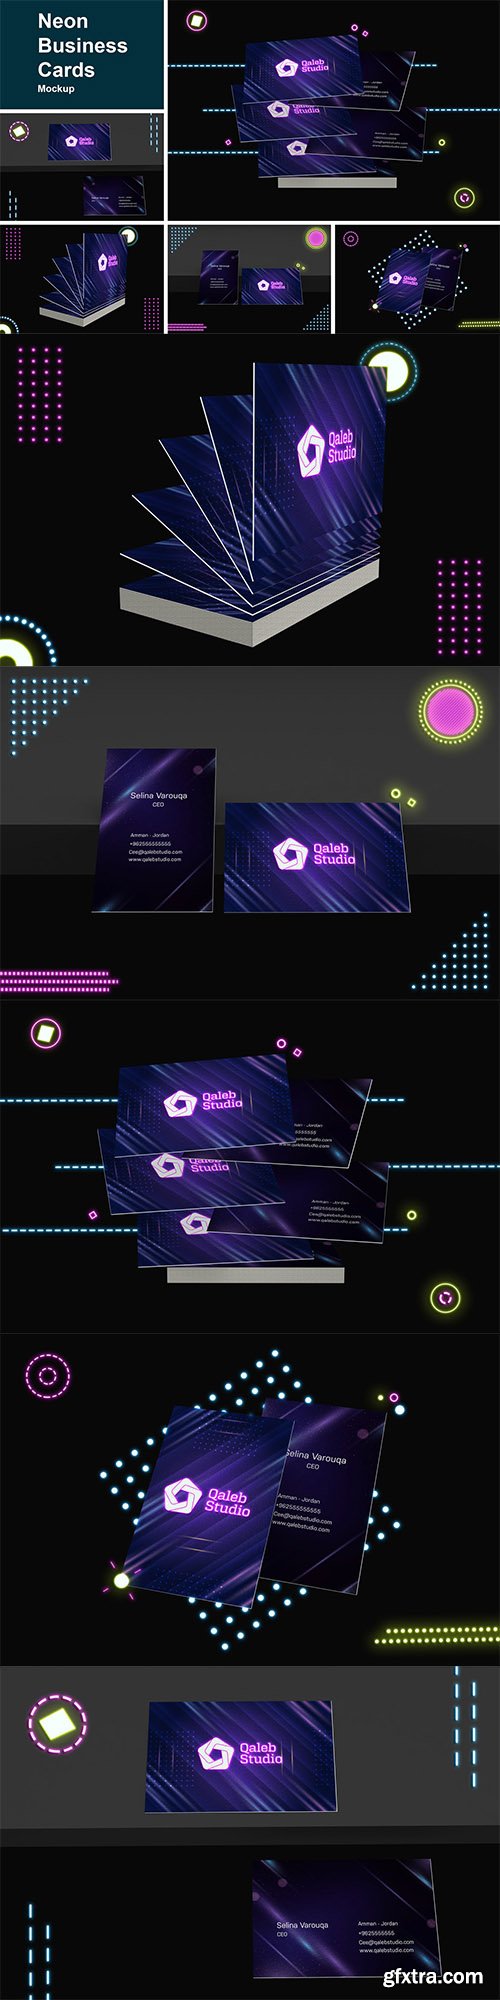 Neon Business Cards Mockup